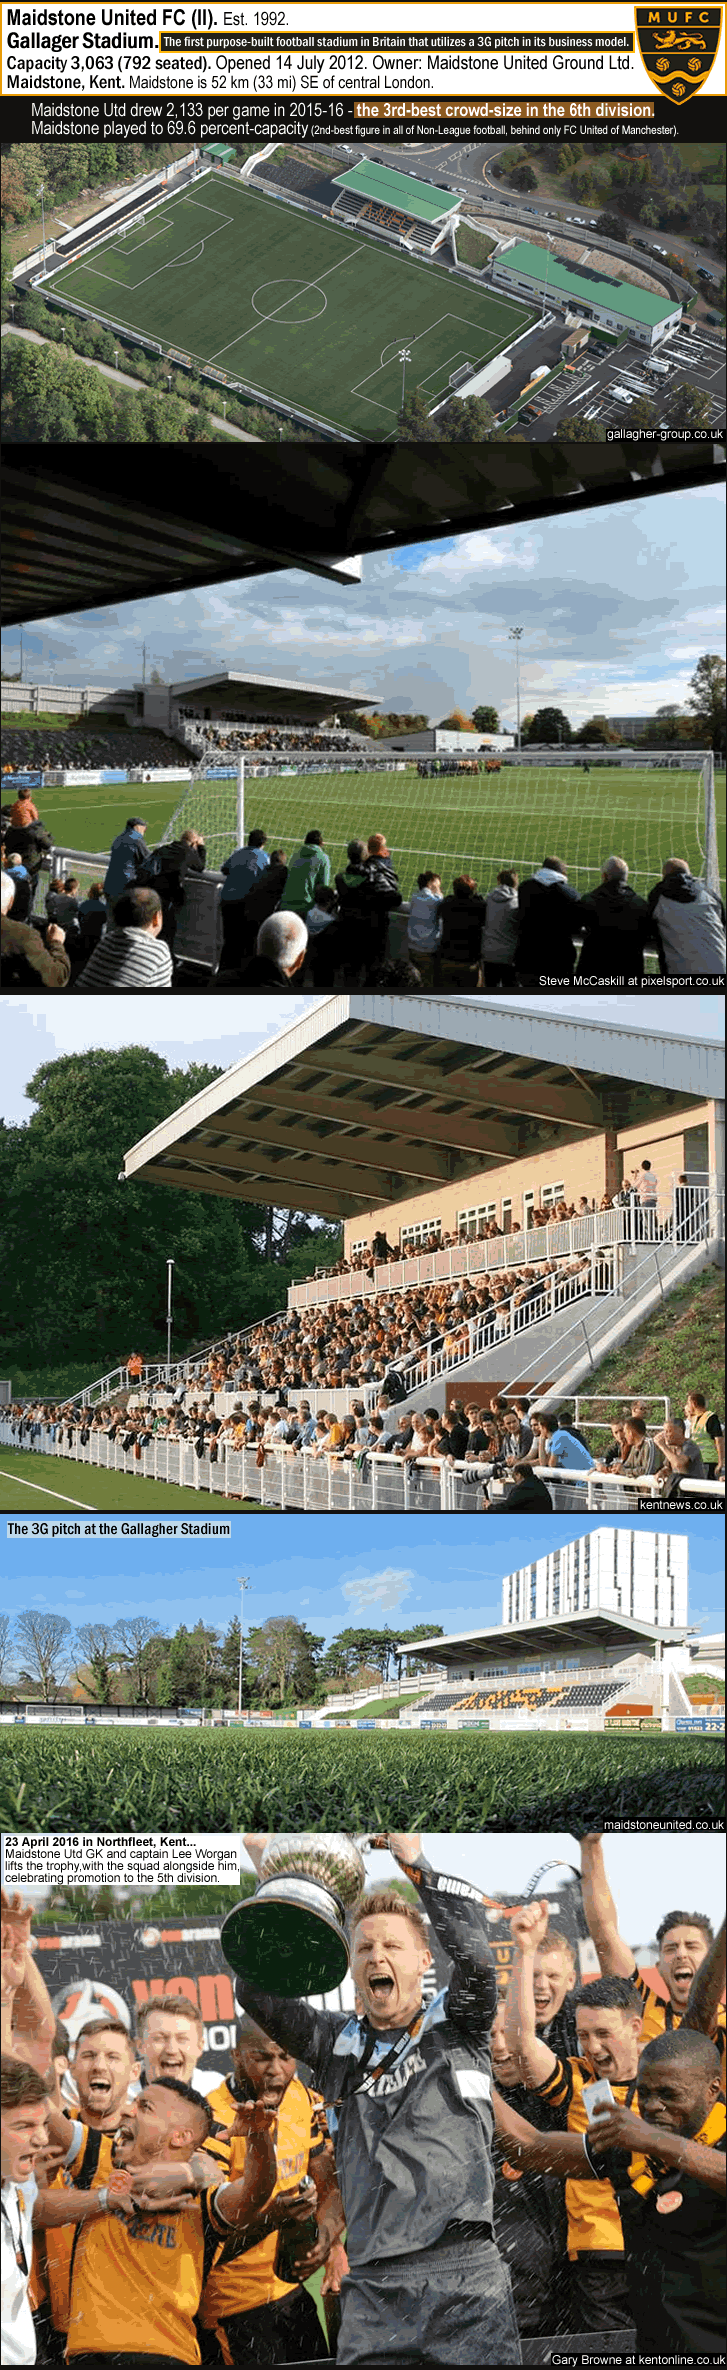 maidstone-utd_gallagher-stadium_kent_promoted-to-5th-division-for-2016-17_i_.gif